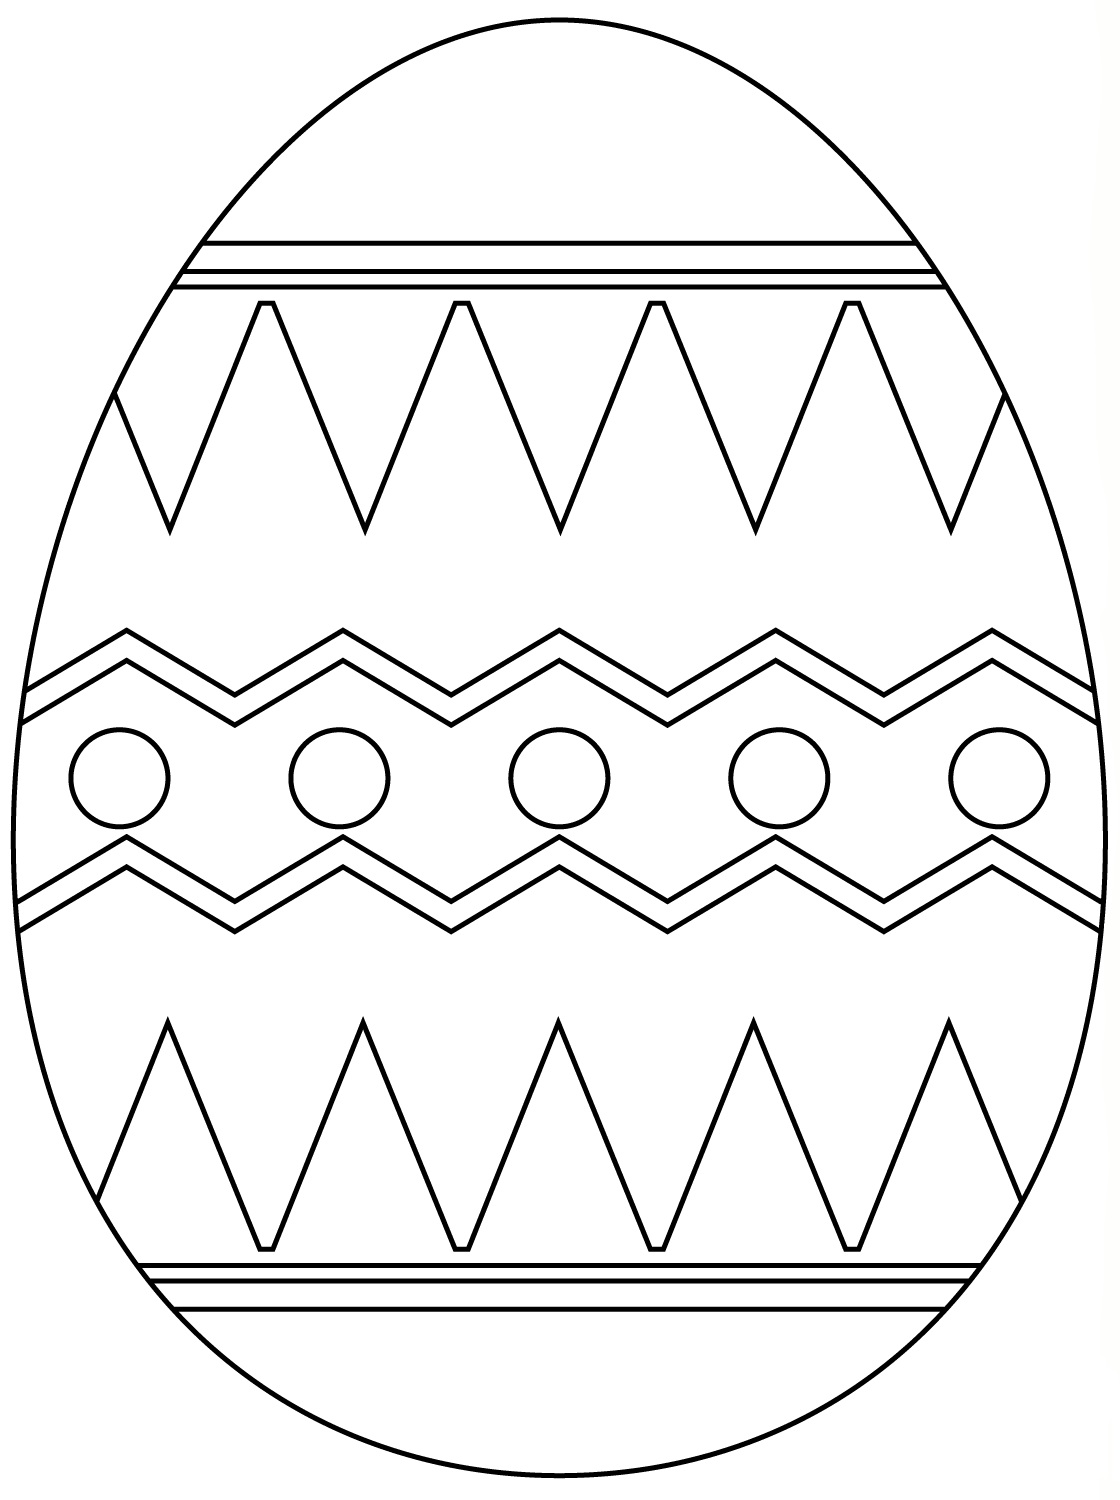 Ukraine Coloring Pages - Learny Kids